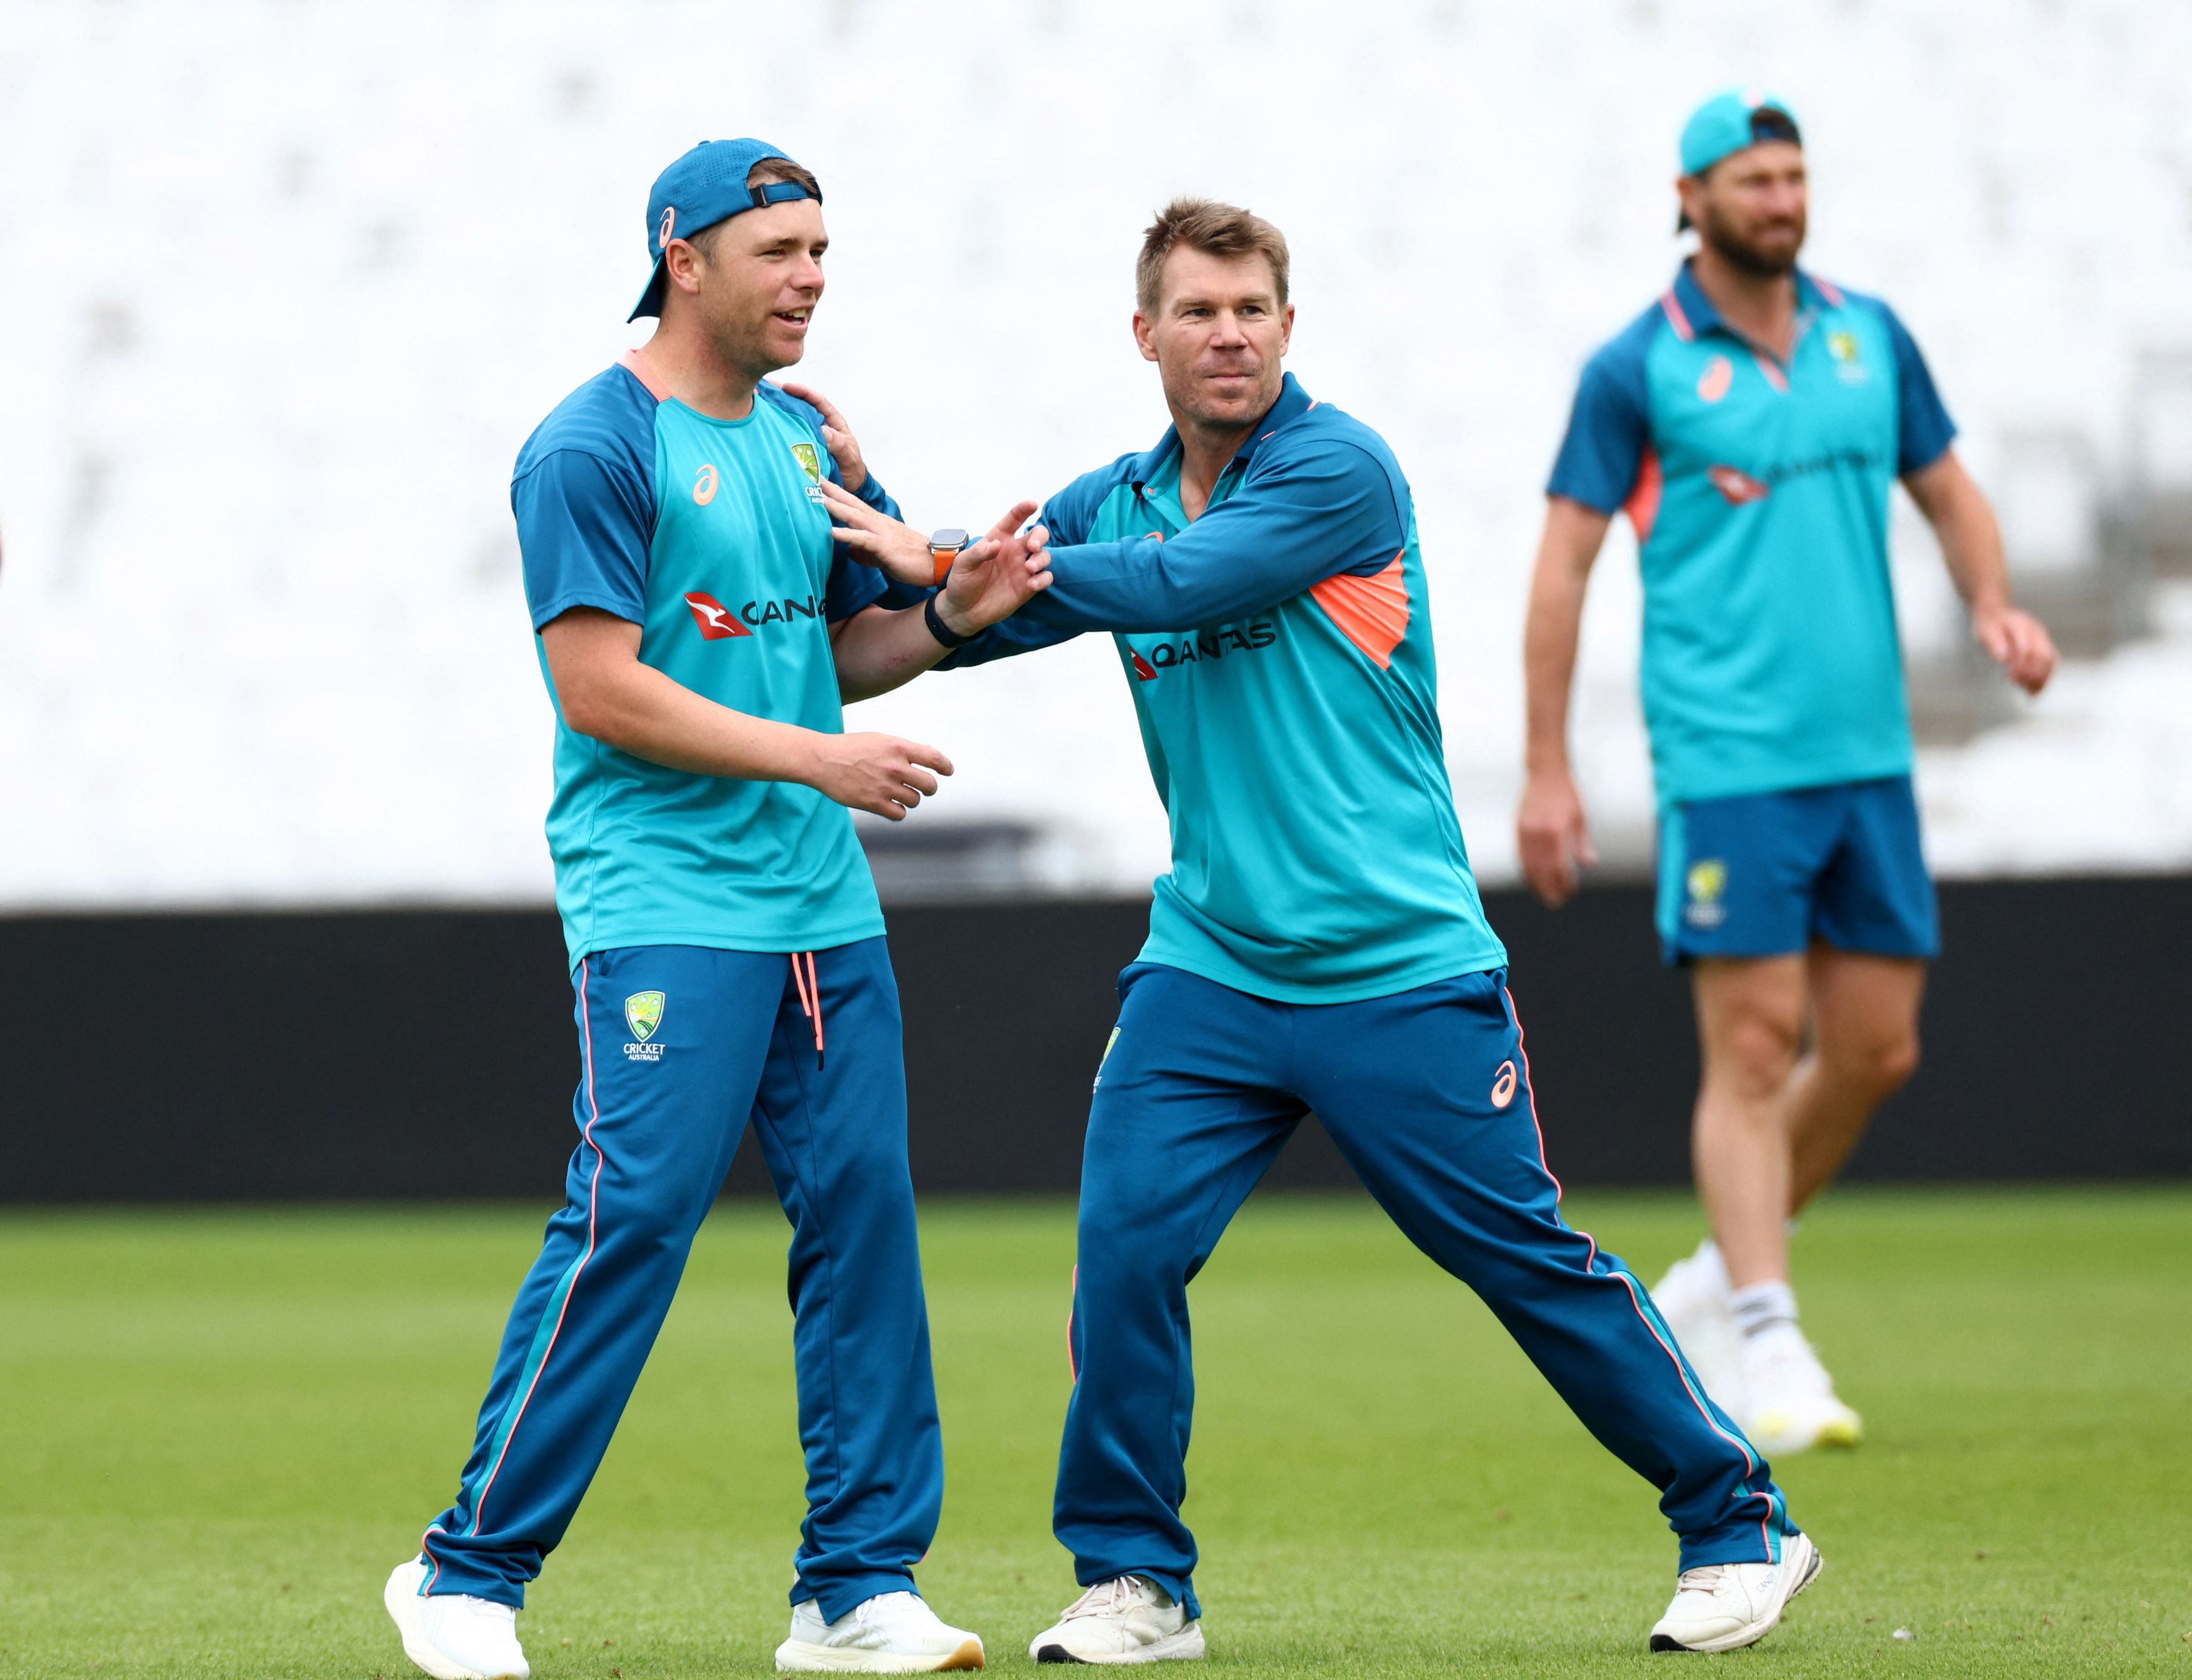 Cricket - Ashes - Fifth Test - Australia Practice - The Oval, London, Britain - July 25, 2023 Australia's Marcus Harris and David Warner during practice Action Images via Reuters/Andrew Boyers